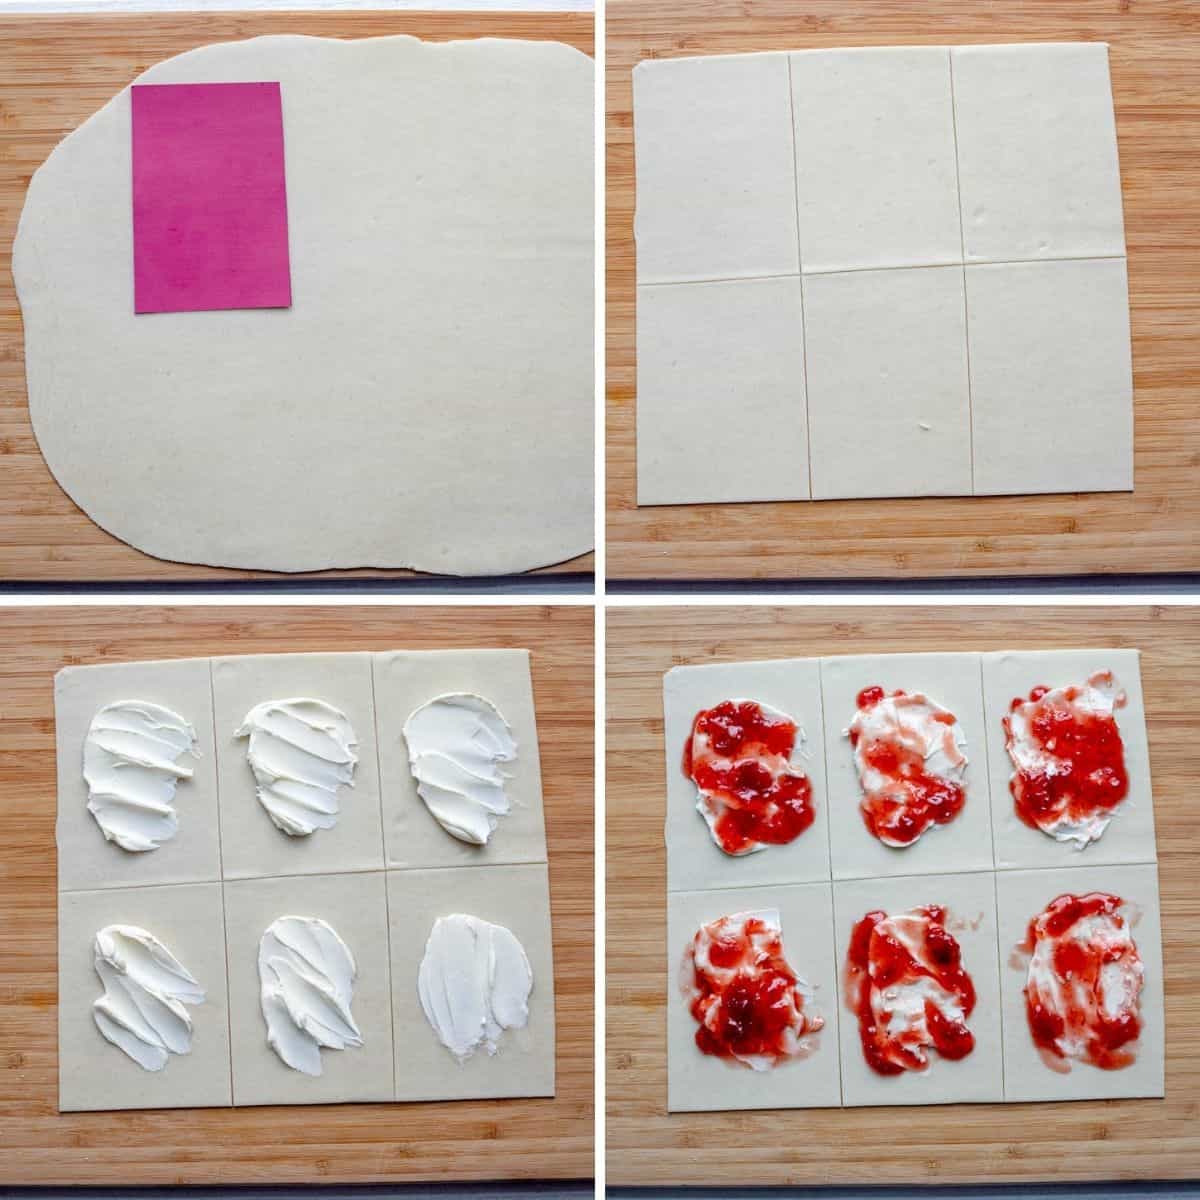 4 image collage to show how to cut out the shape and add the filling